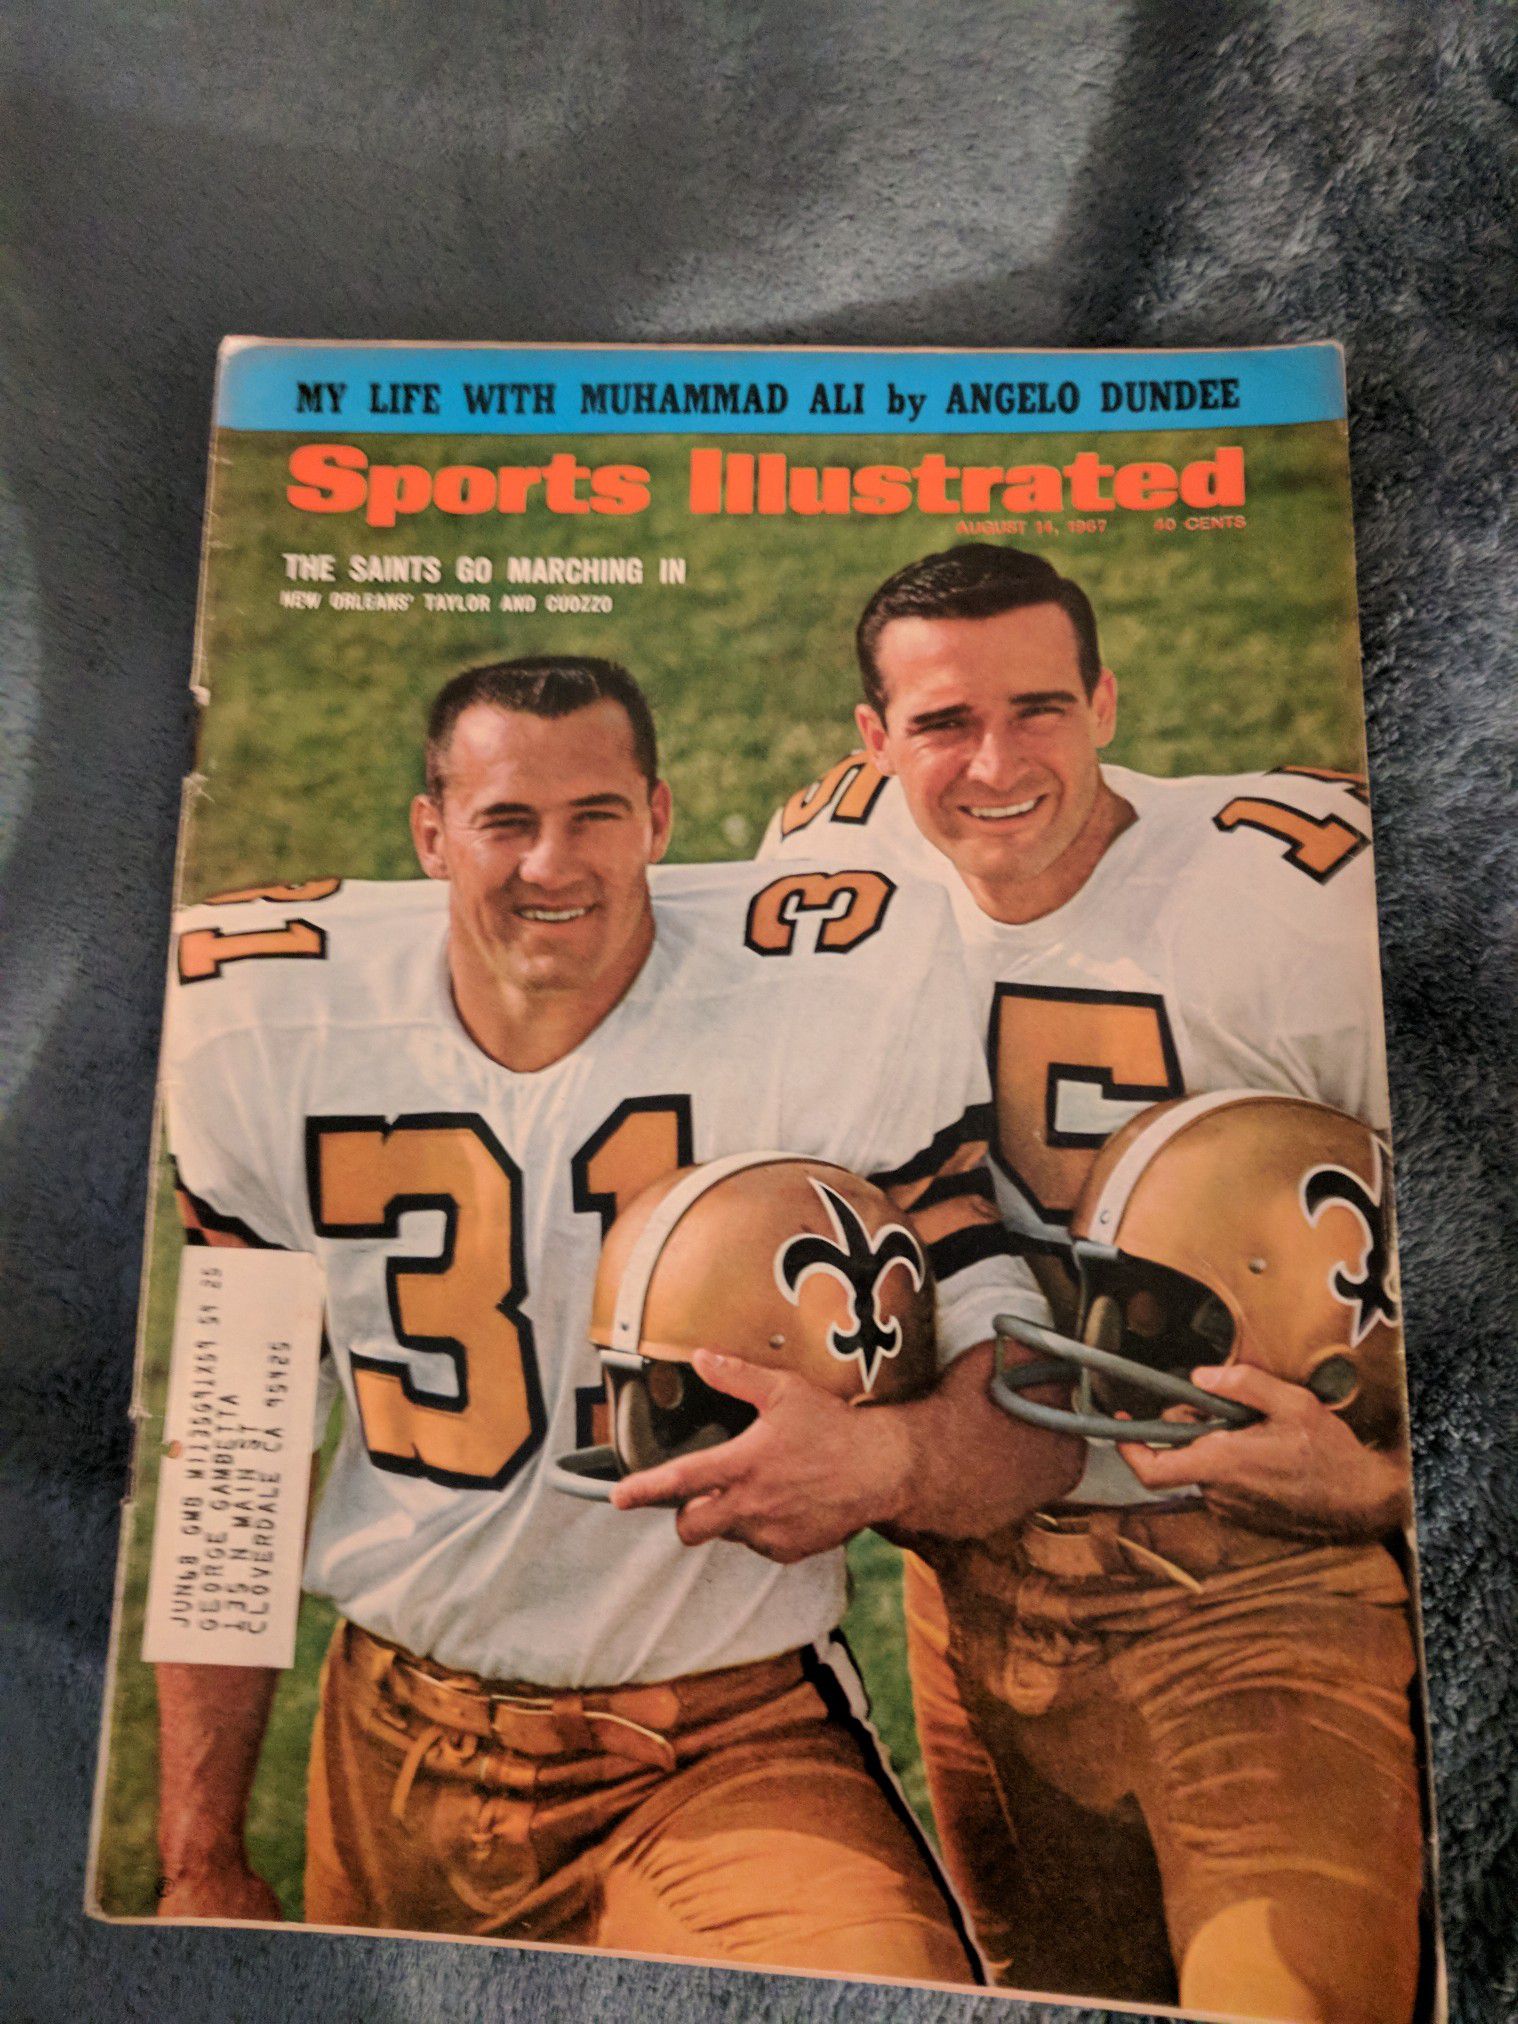 1967 sports illustrated The Saints go marchin in